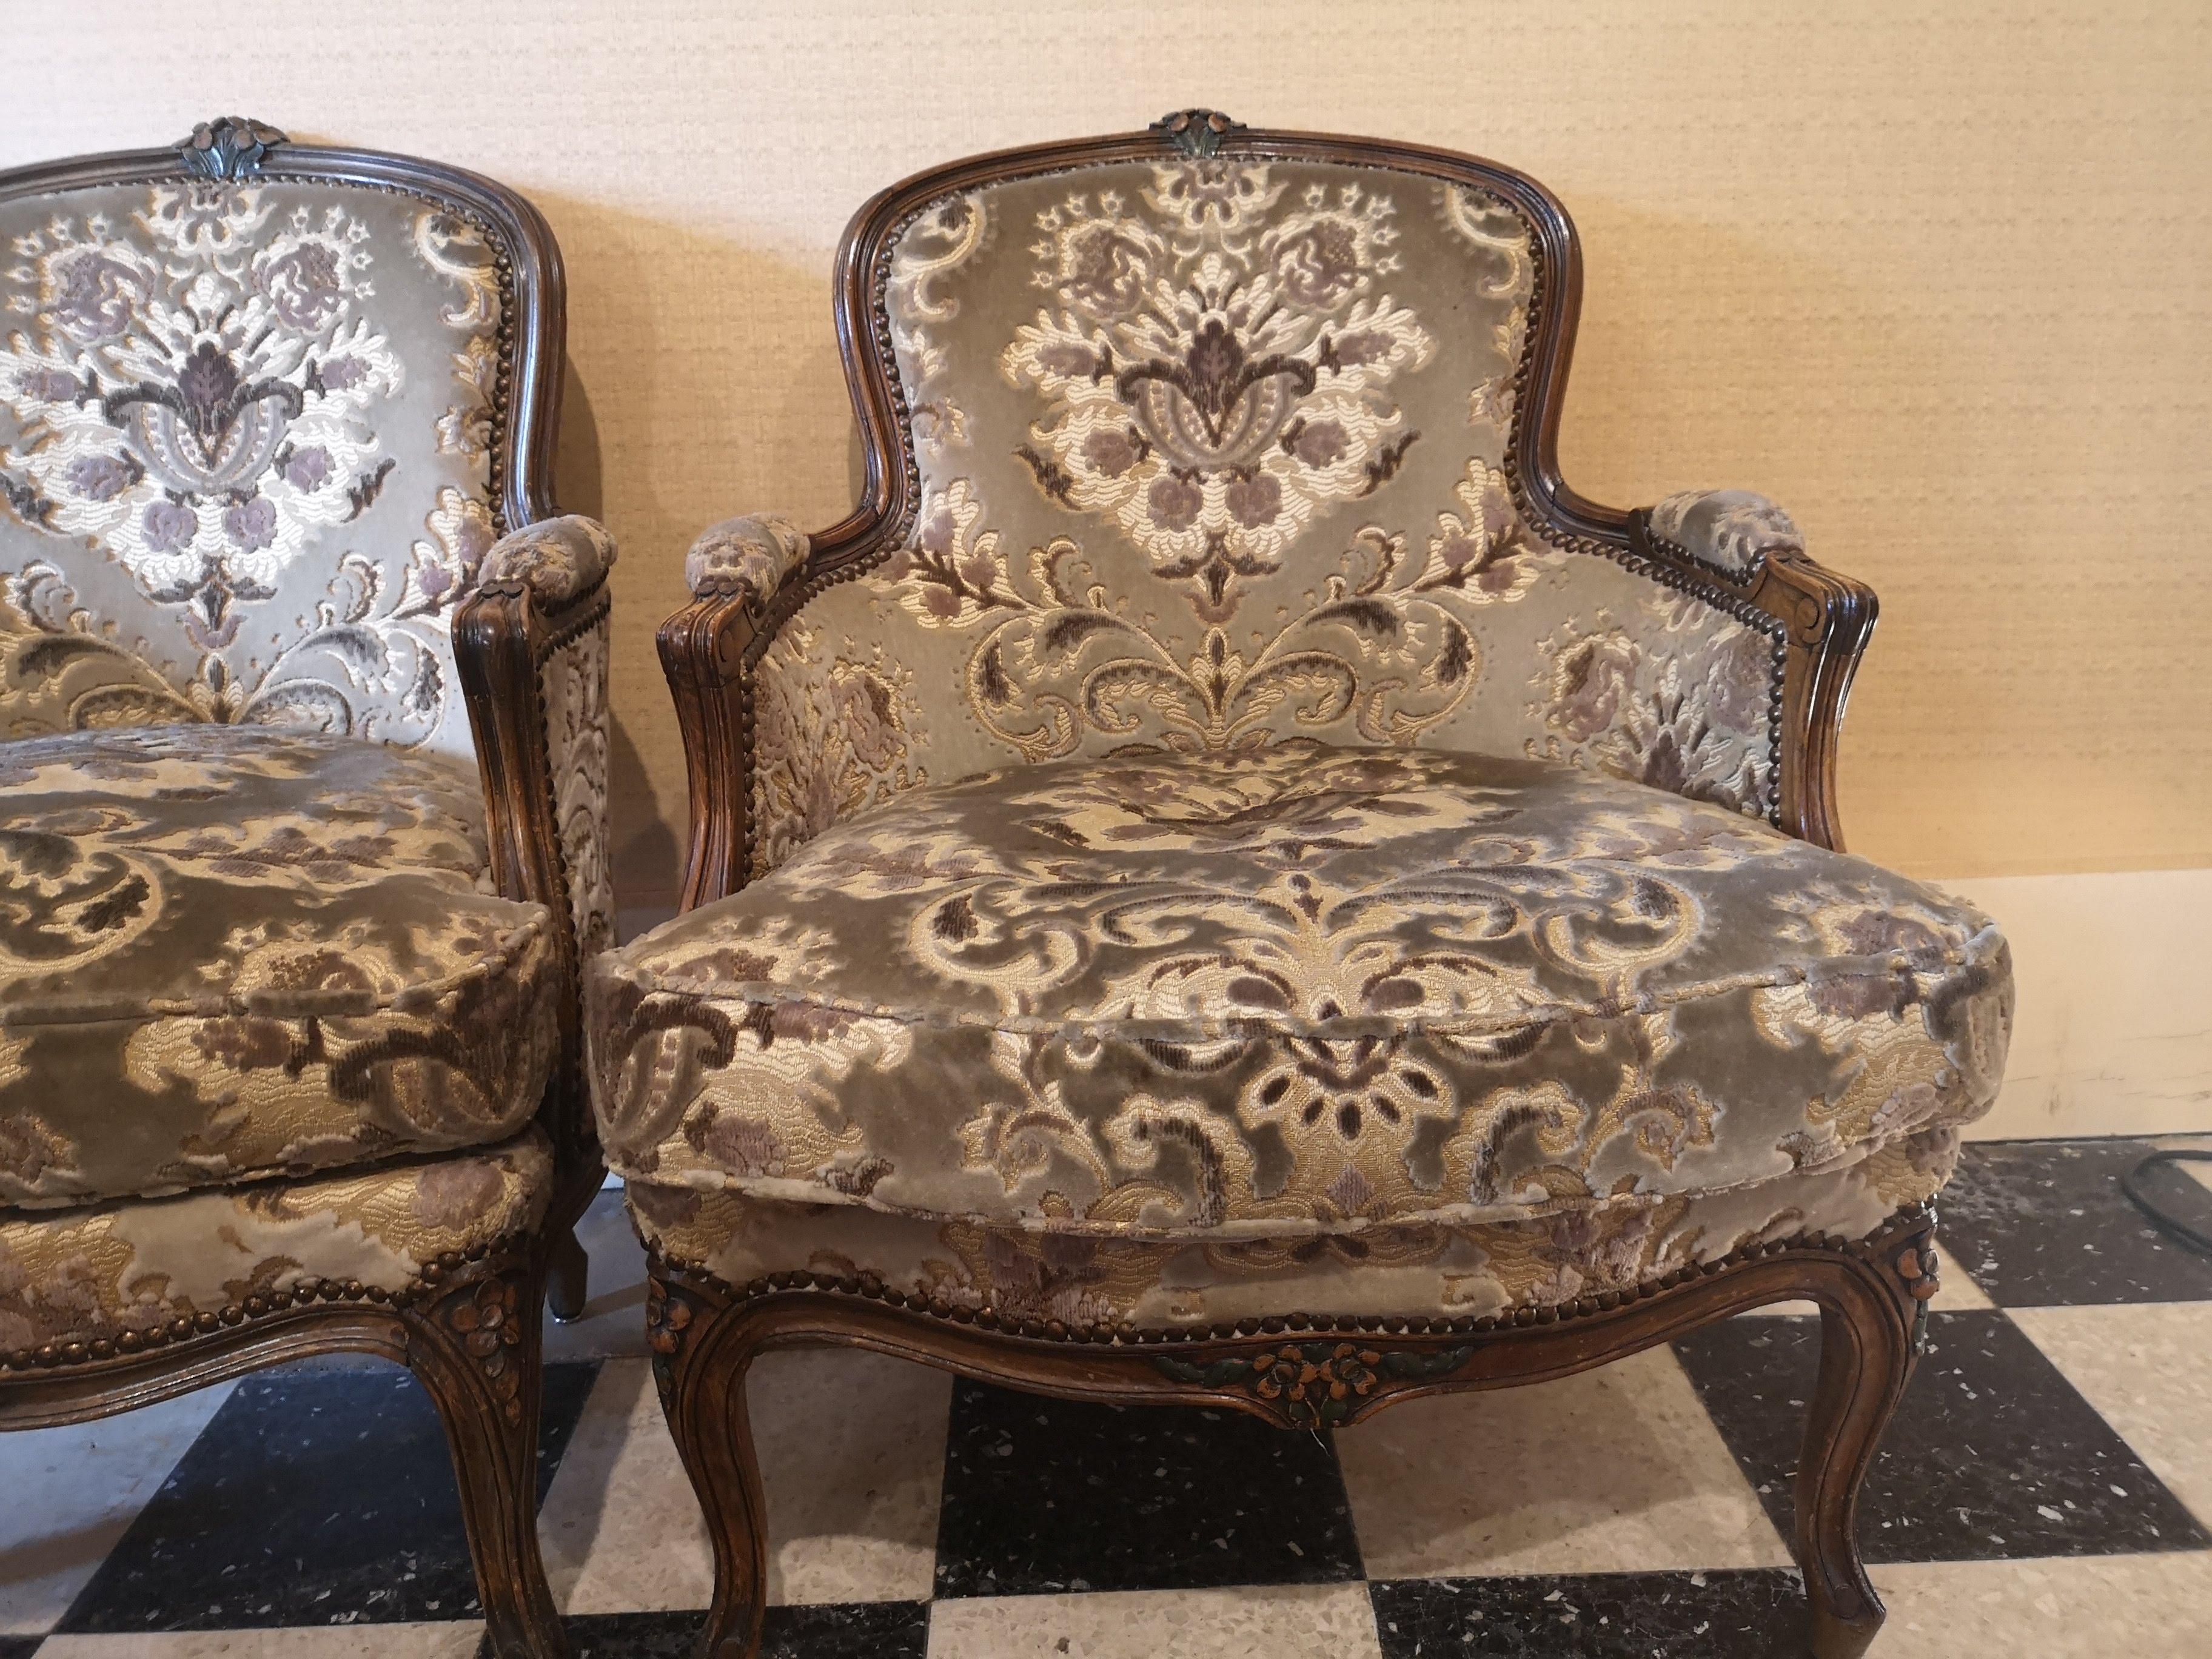 A pair of bergère armchairs in natural wood from the 20th century.
The fabric and cushions are period and in good condition.
The seats are molded and sculpted, the back is curved for comfort.